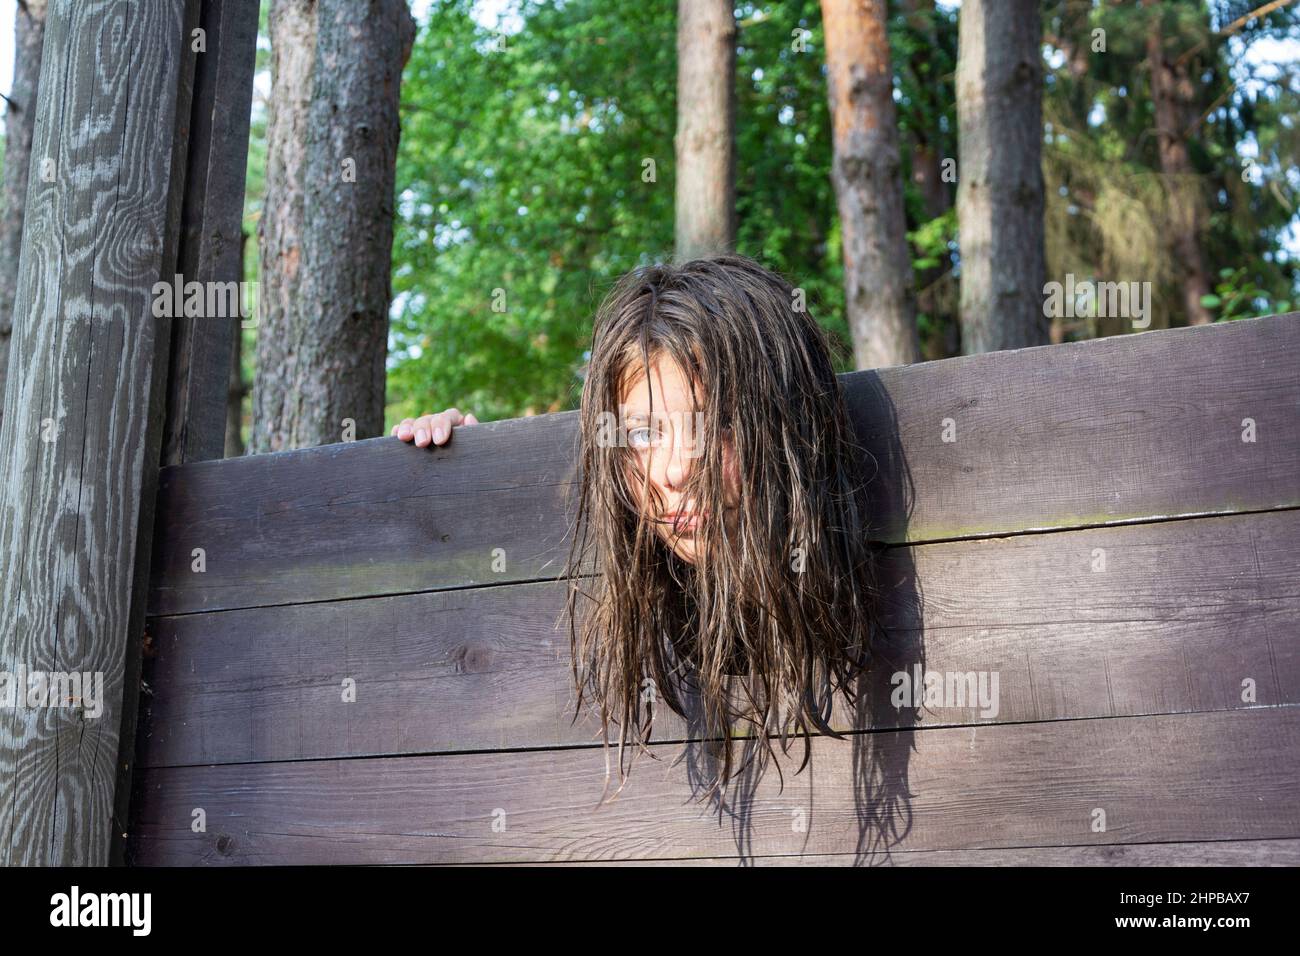 the head of a girl with long disheveled hair clamped in a guillotine, a scene of a medieval execution, a sentence. Stock Photo